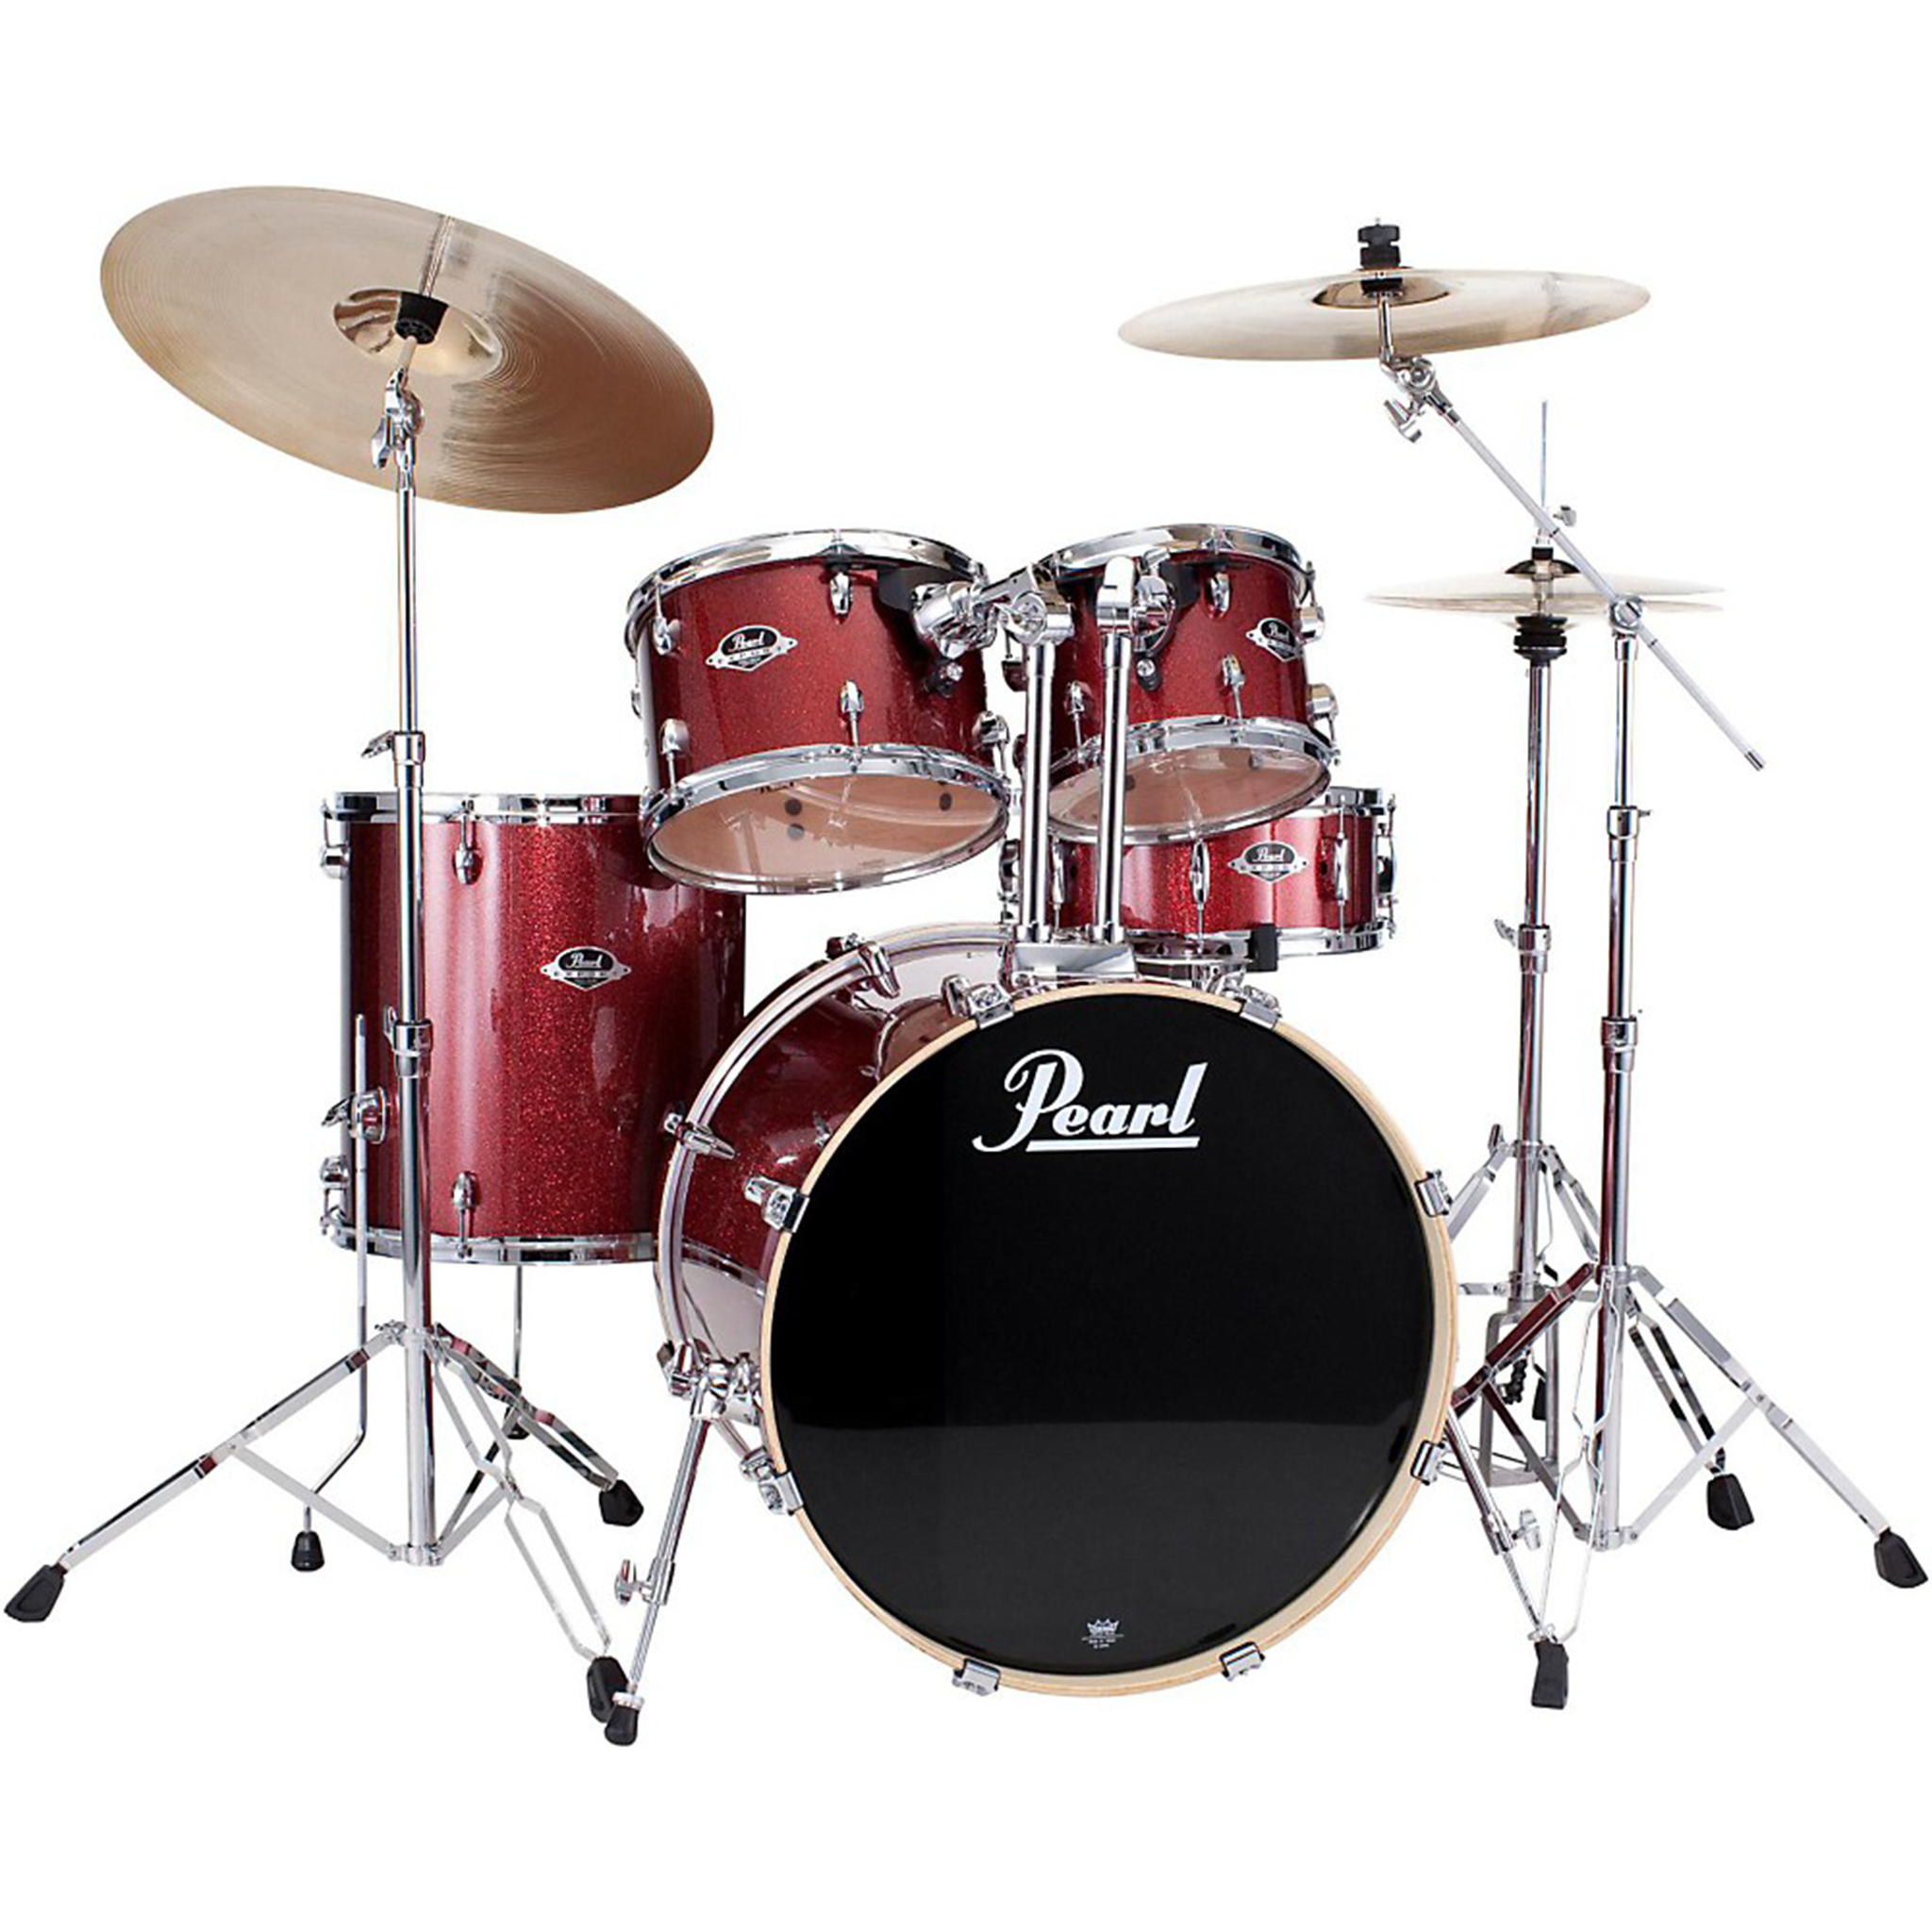  PEARL EXX725SP/C704 - RED SPARKLE 